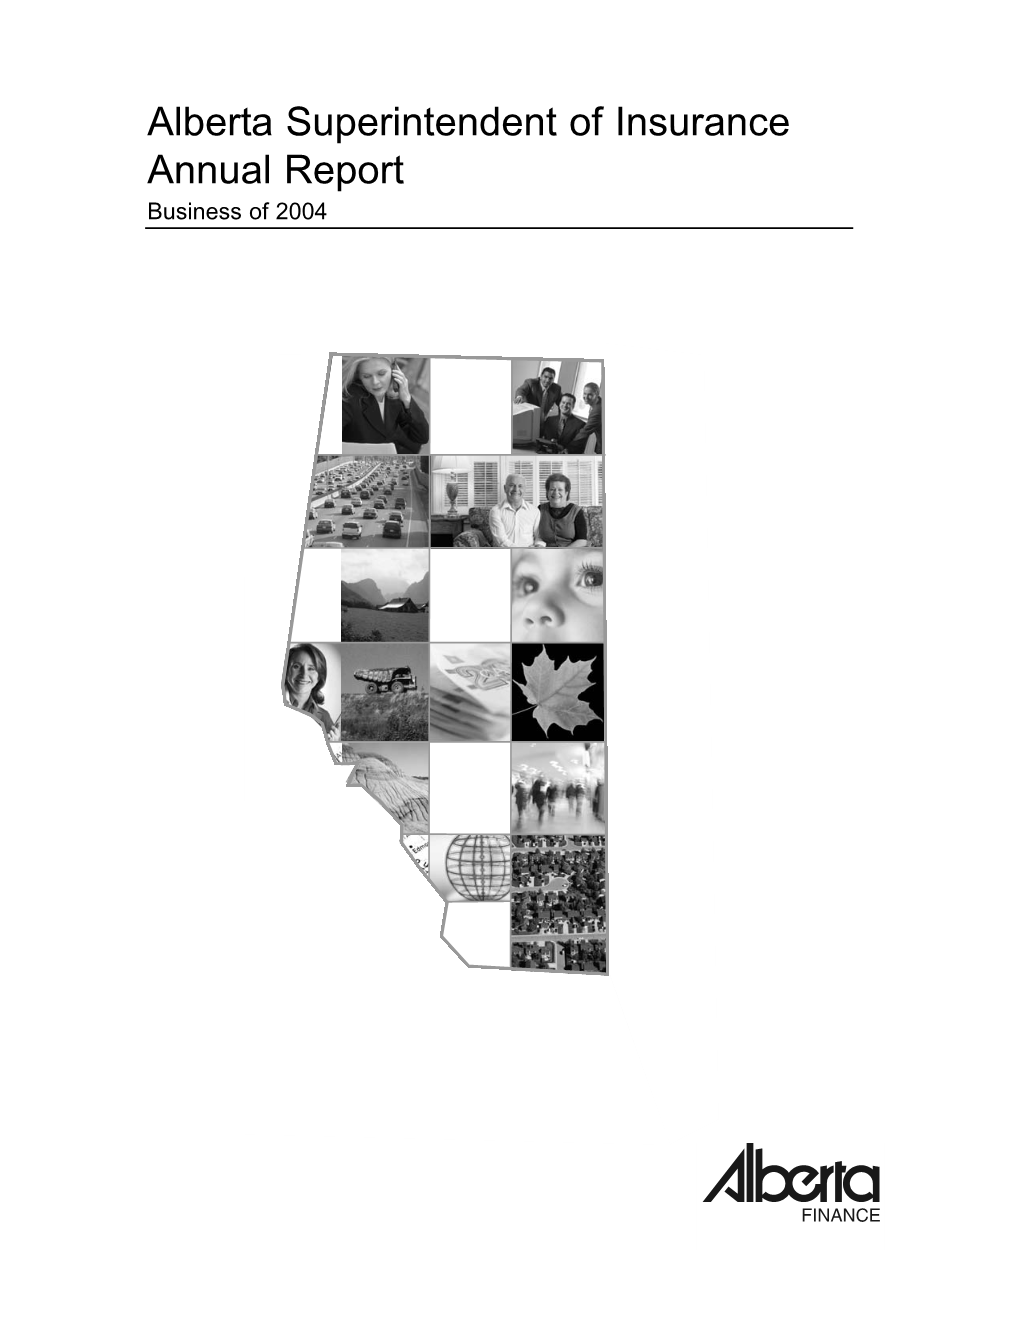 2004 Superintendent of Insurance Annual Report